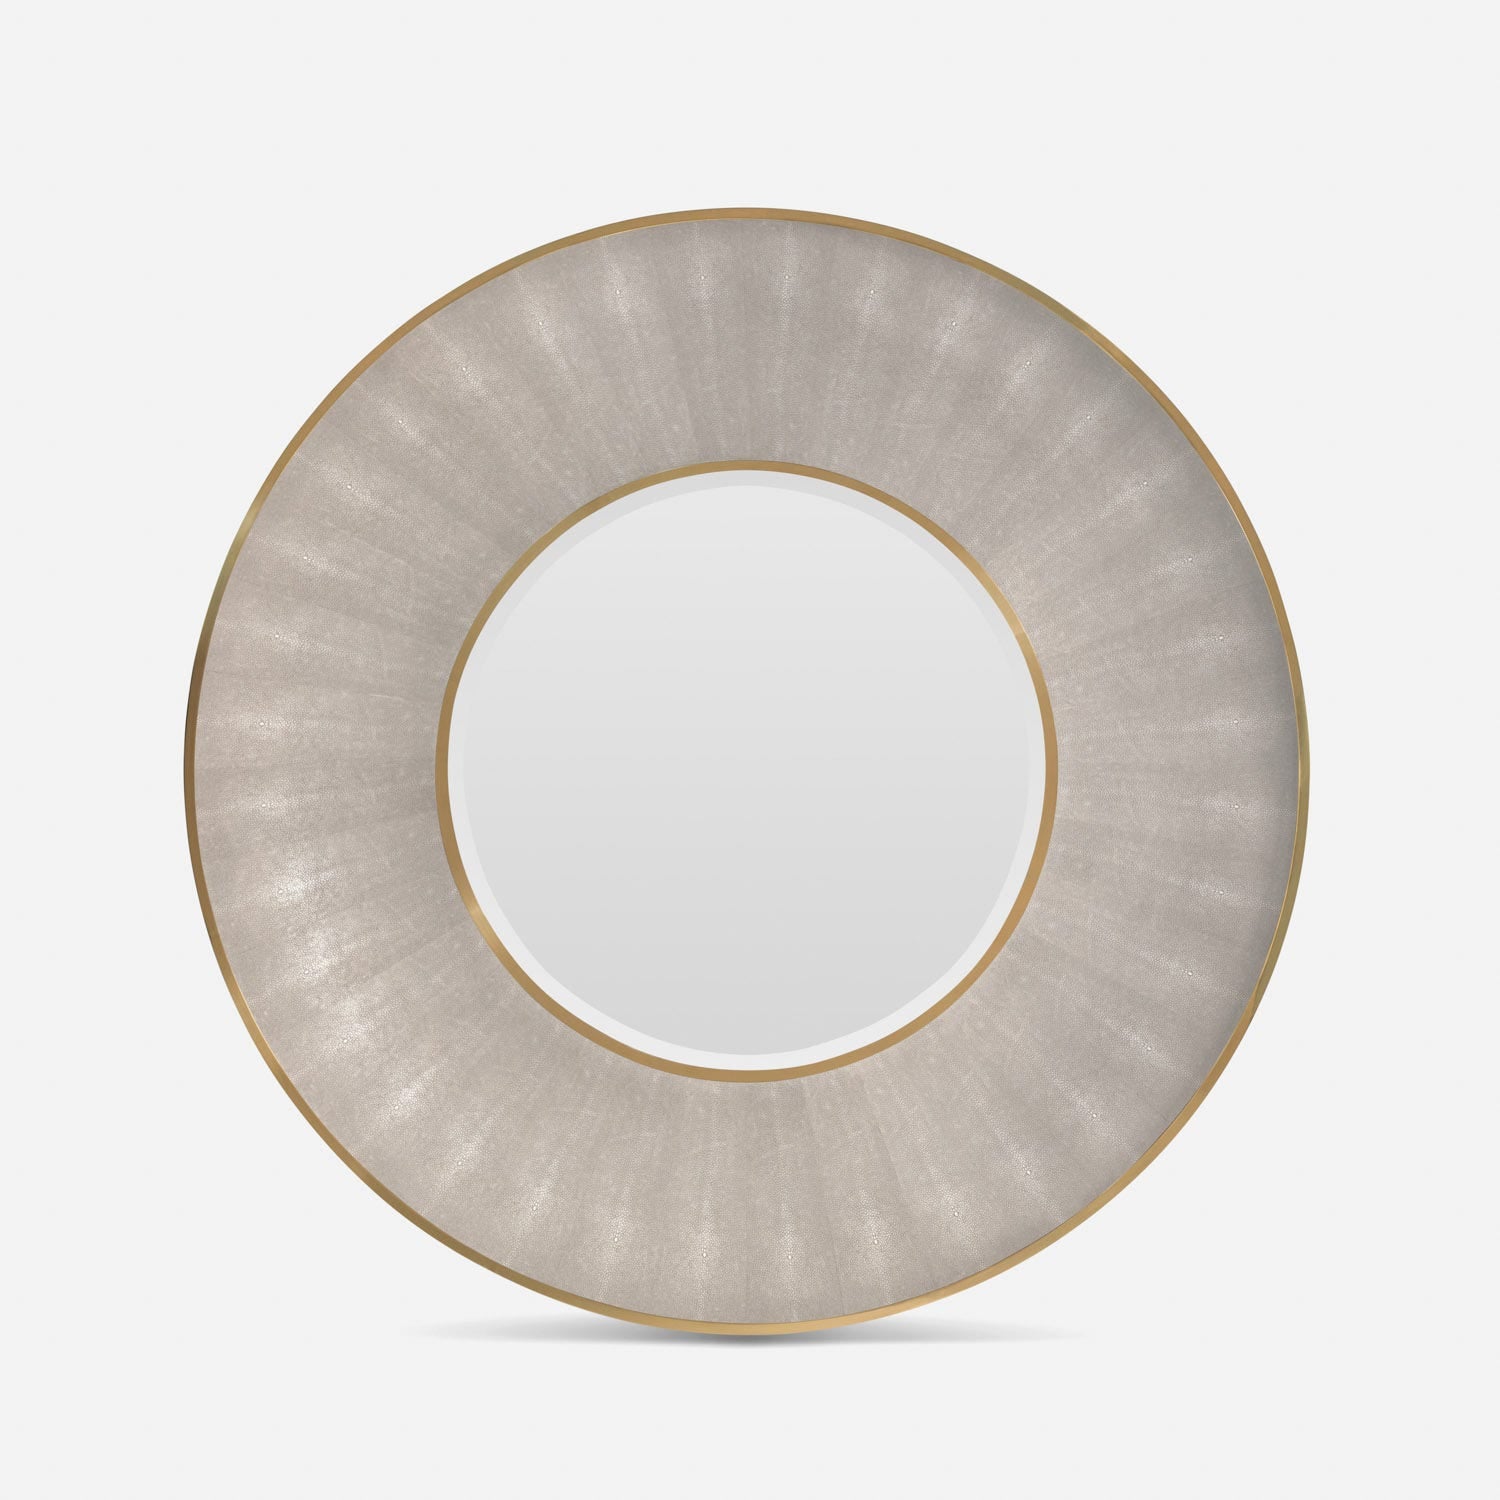 Made Goods Armond Mirror in Sand Faux Shagreen with Brass Finish